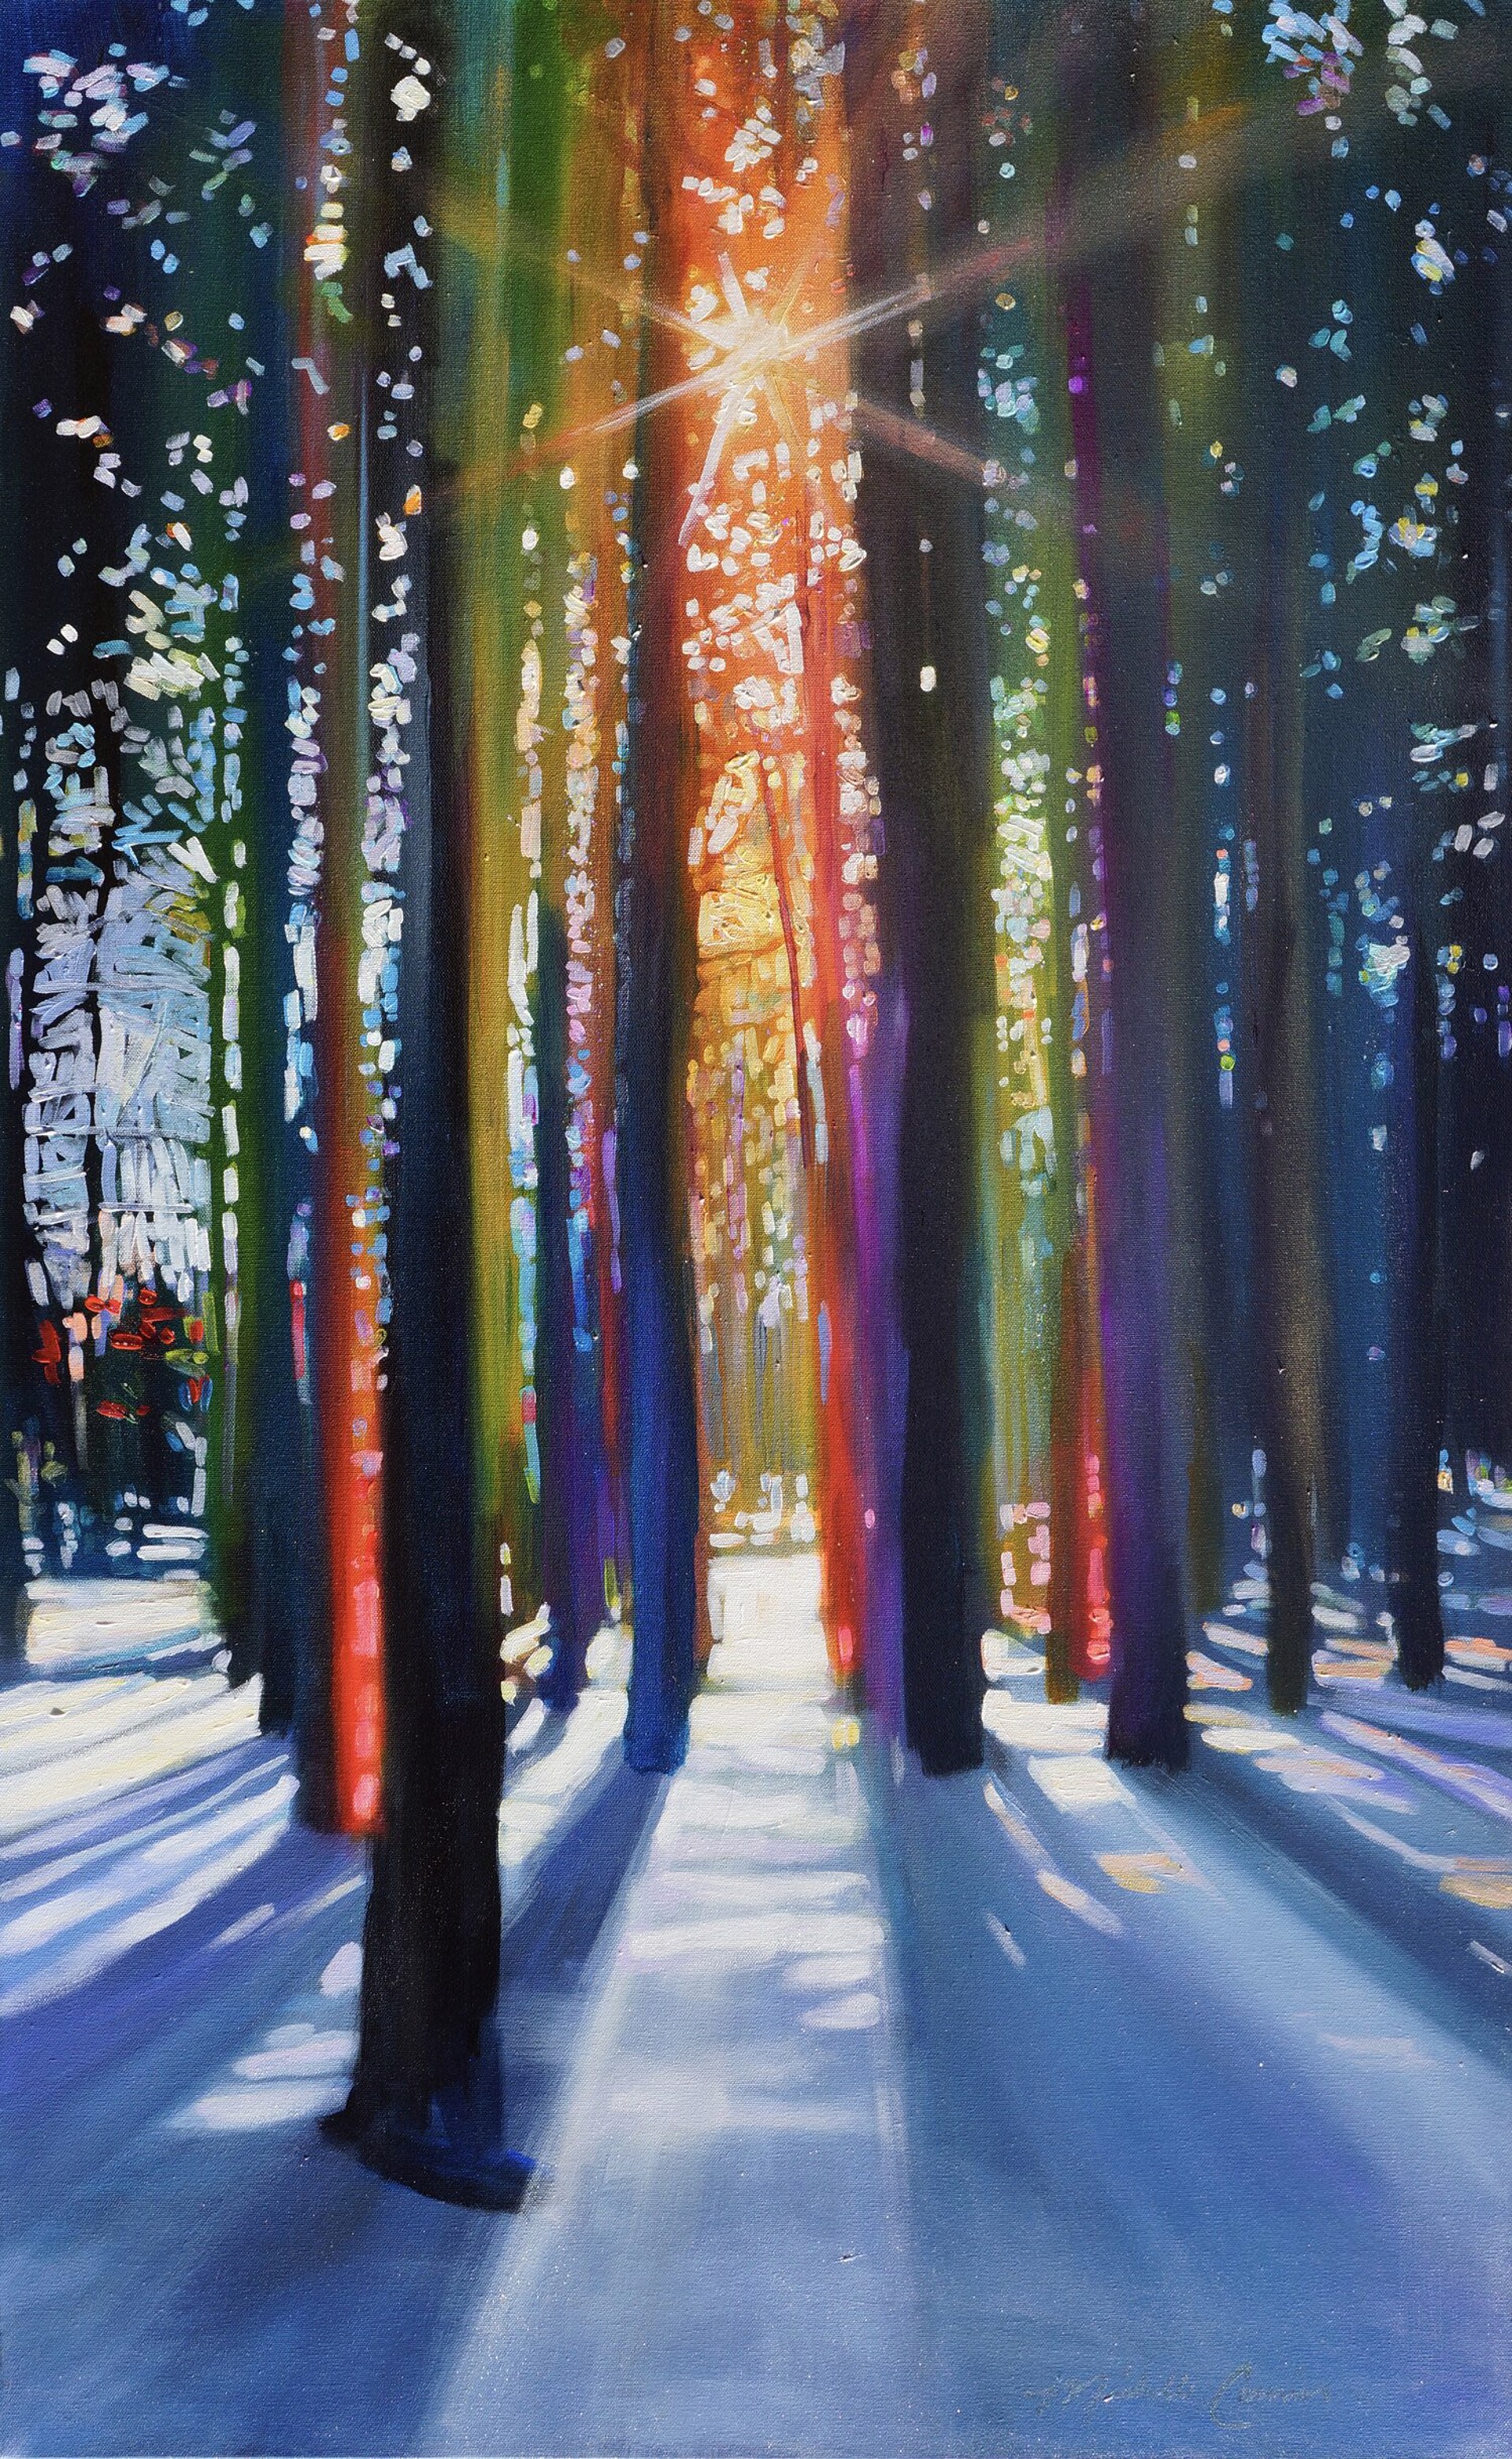 Winter Sun #2 by Michelle Courier